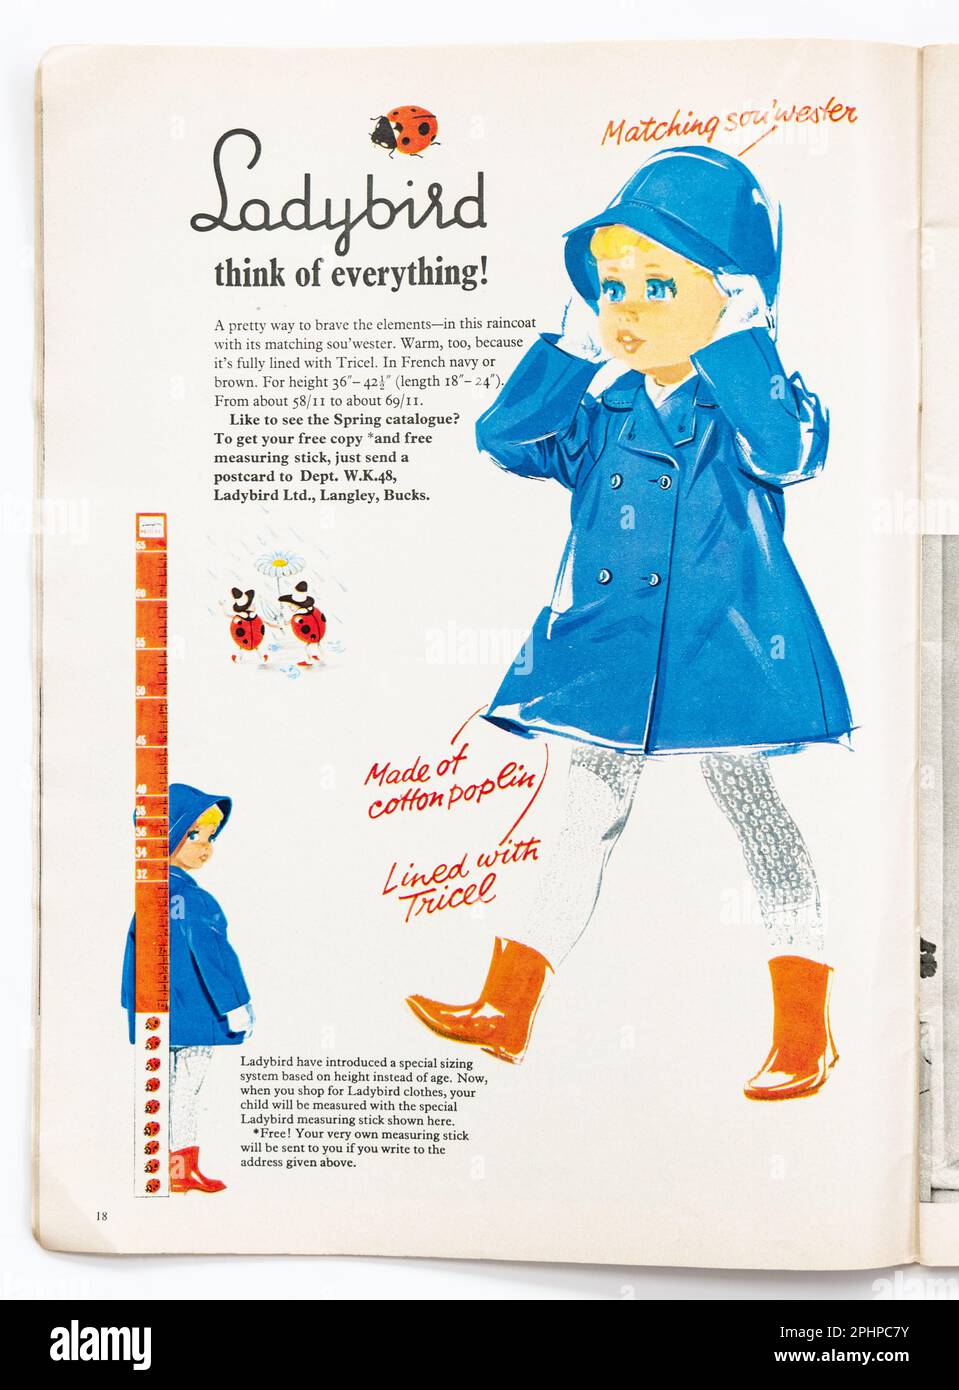 Ladybird childrens clothing brand advertisement from Womens Realm Home Sewing and Knitting Magazine April 1967 Stock Photo